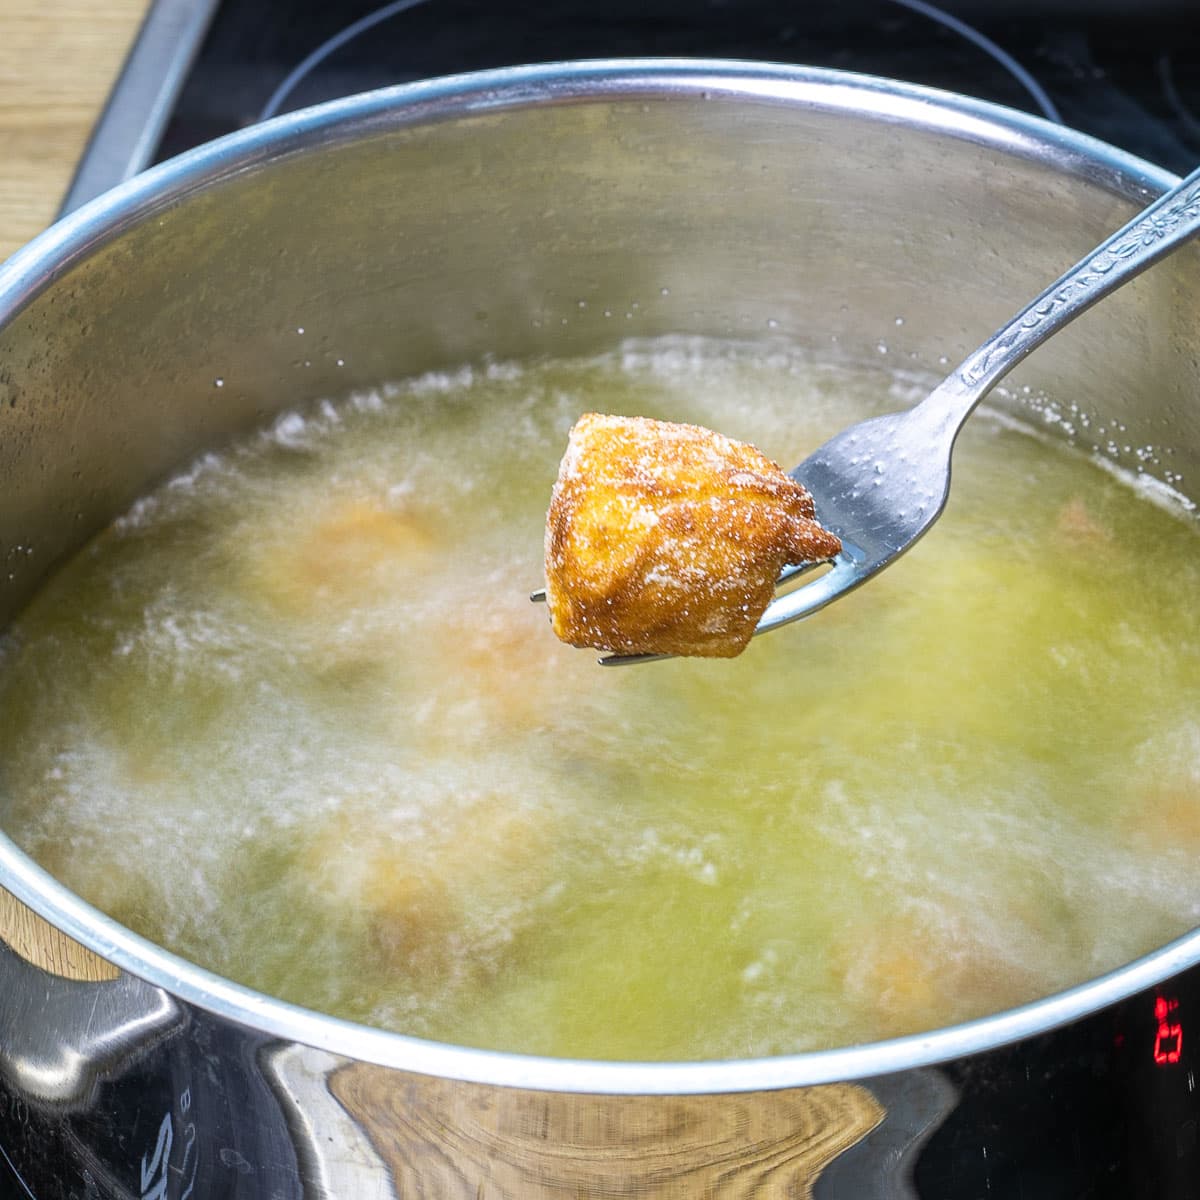 A hand is holding a fork with a crispy breaded deep-fried tofu cube right above a deep pan with hot oil.